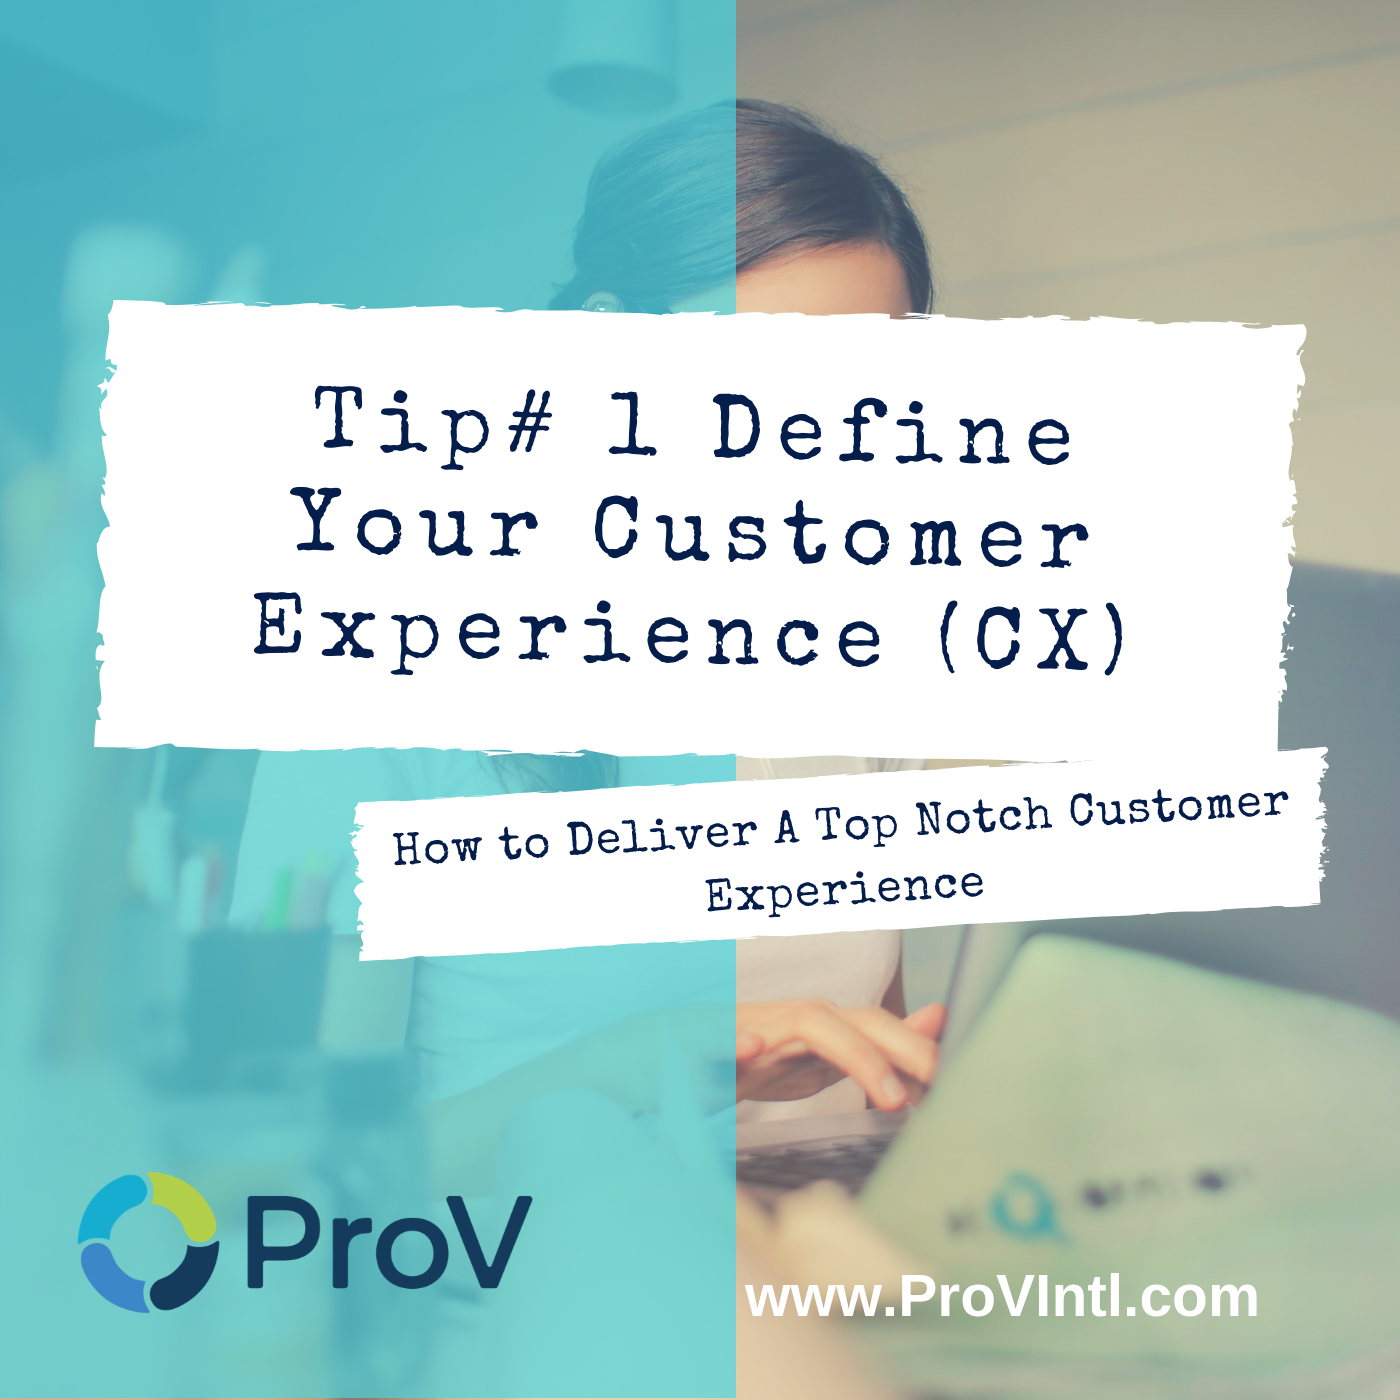 CX - Customer Experience Solutions